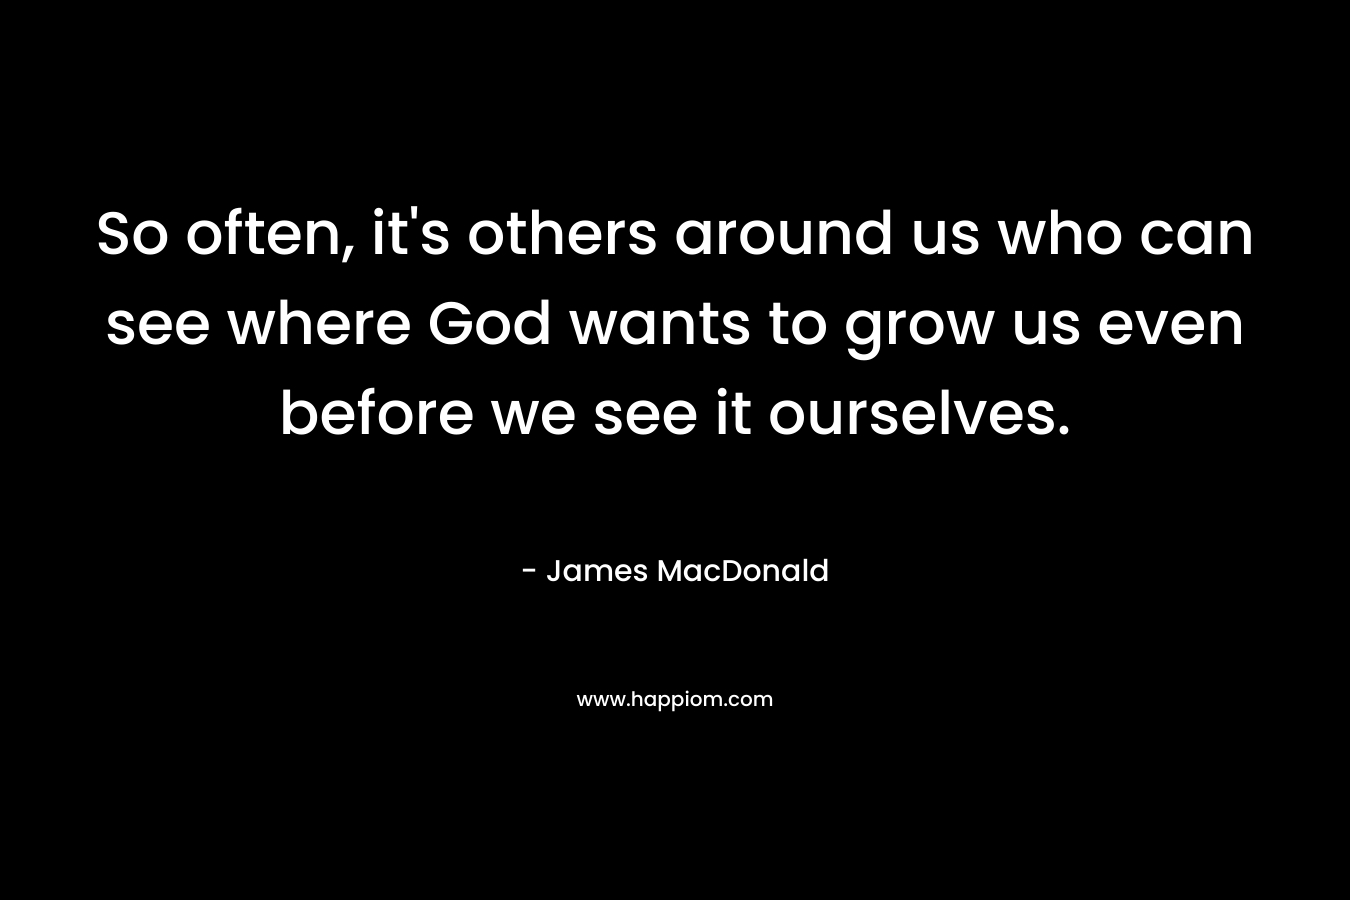 So often, it's others around us who can see where God wants to grow us even before we see it ourselves.